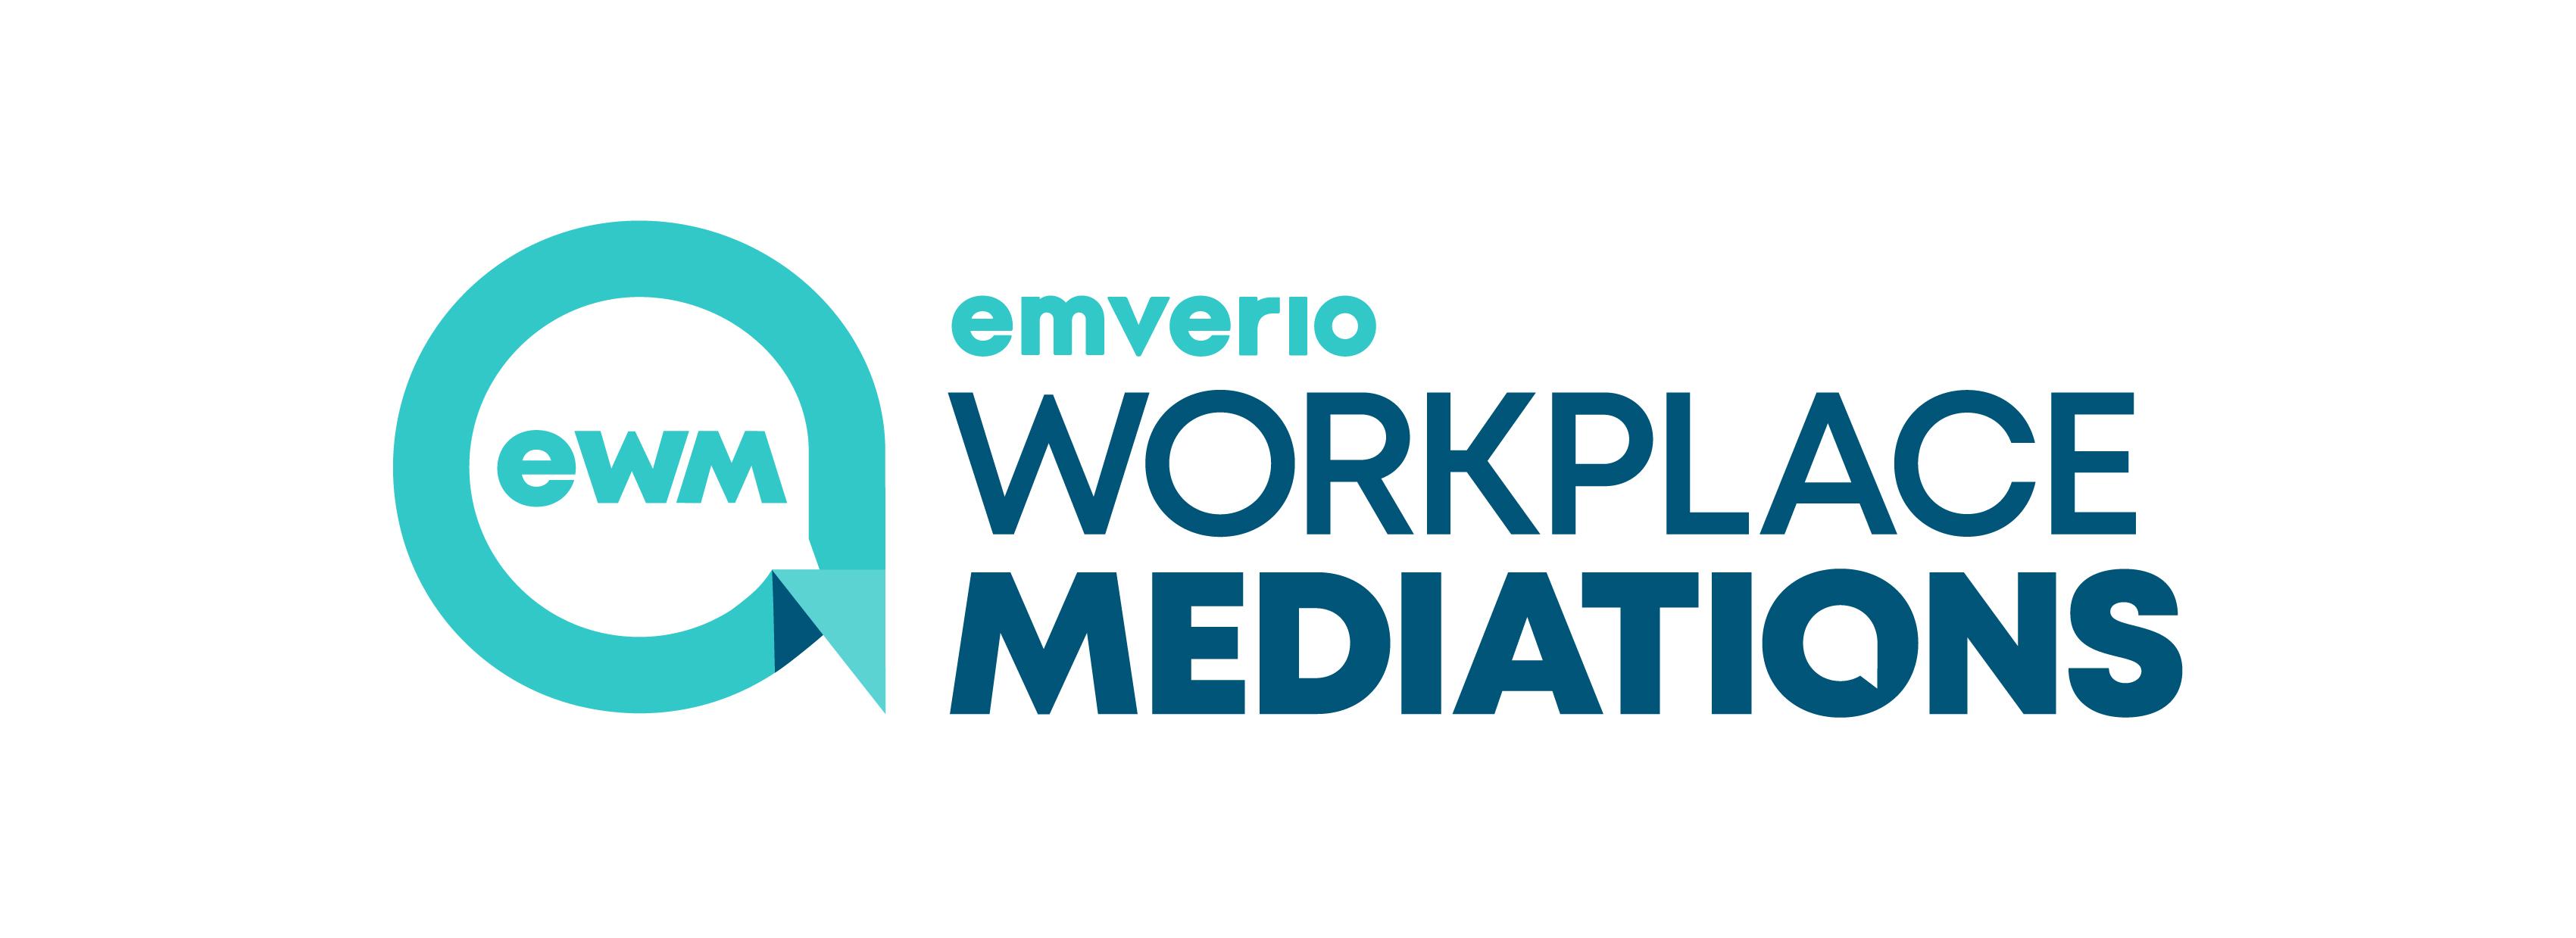 How to Conduct a Workplace Mediation (an introduction) Canberra